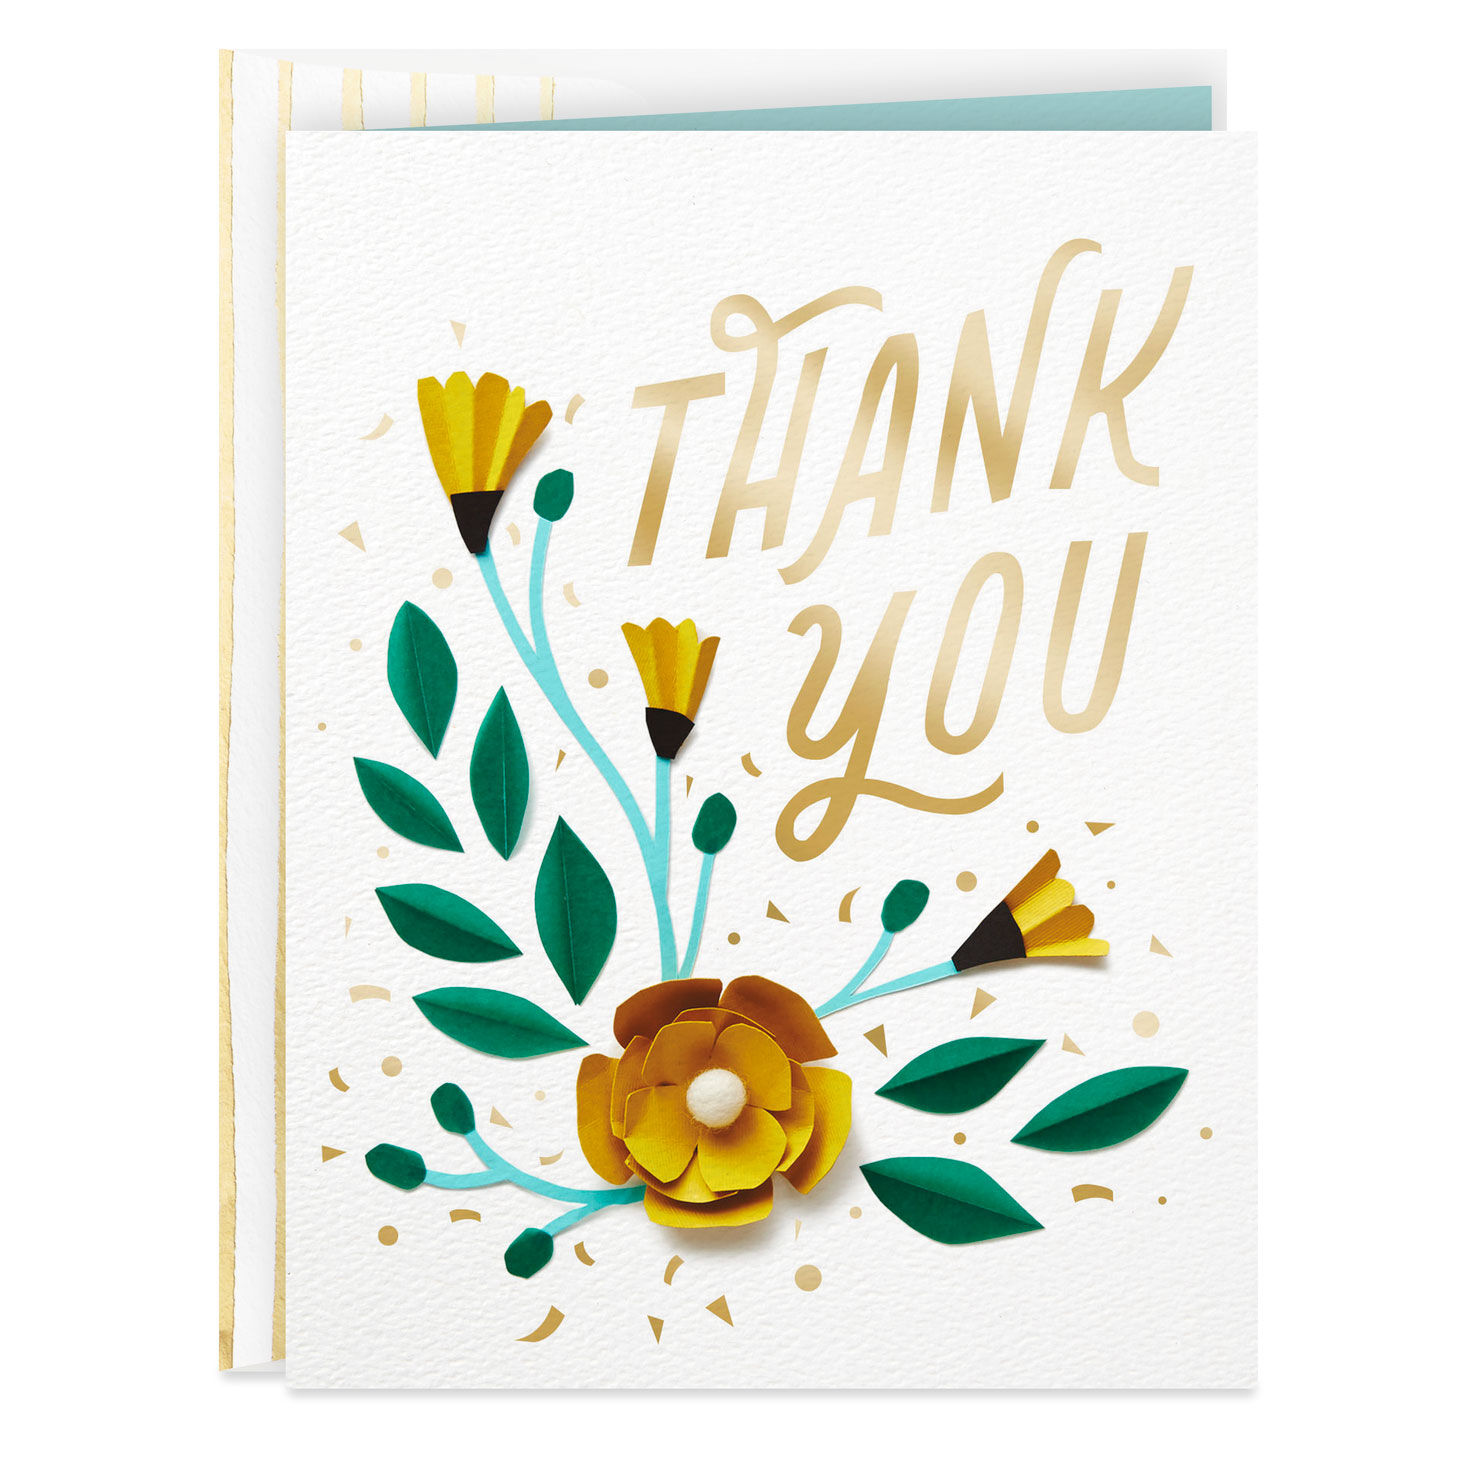 Hallmark Special Connections Thank You Card Assortment for Caring Connectors 7 Cards with Envelopes 